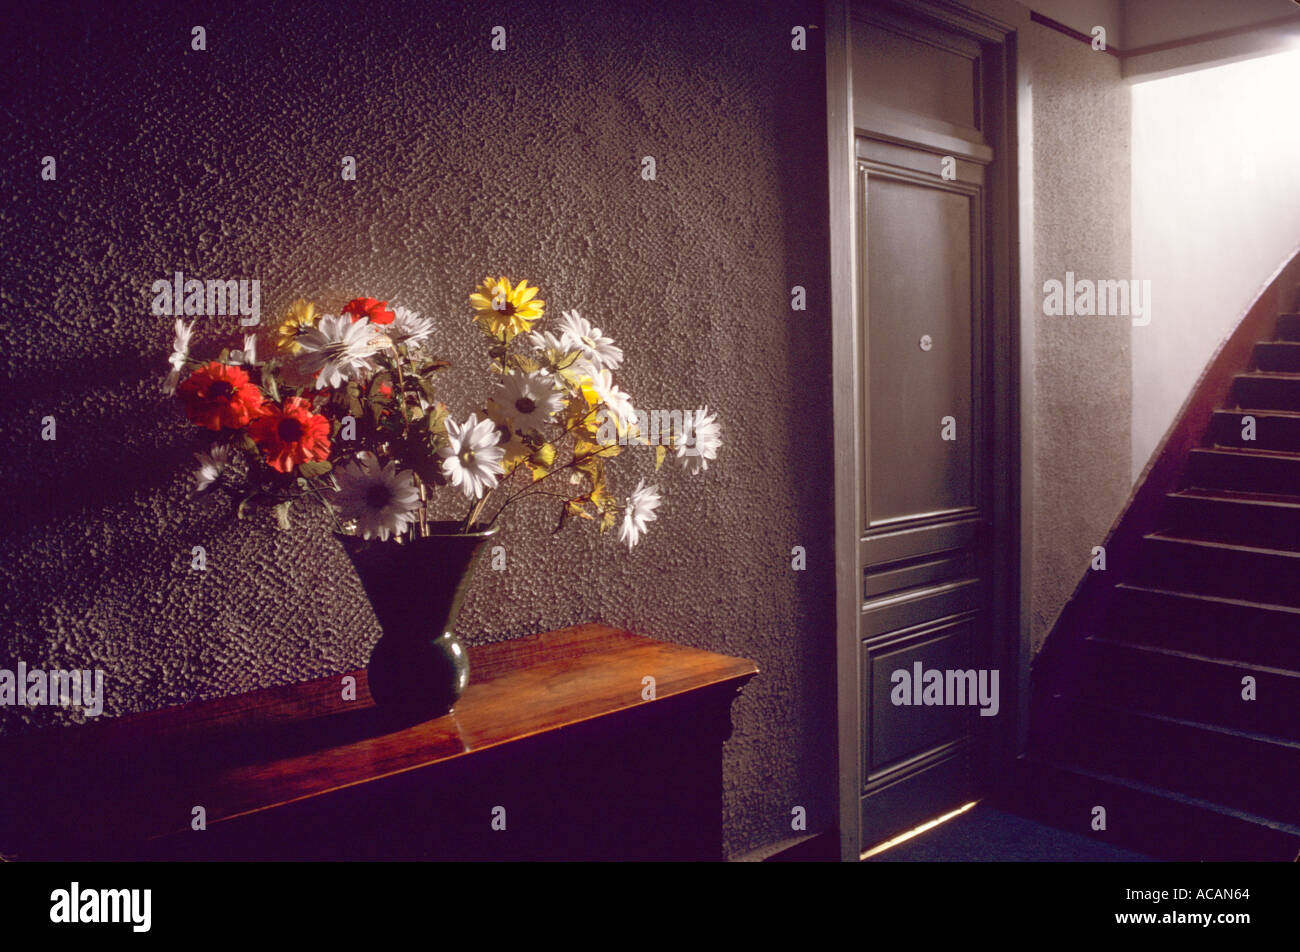 Arrangement of flowers on sideboard in hallway of french country hotel Stock Photo